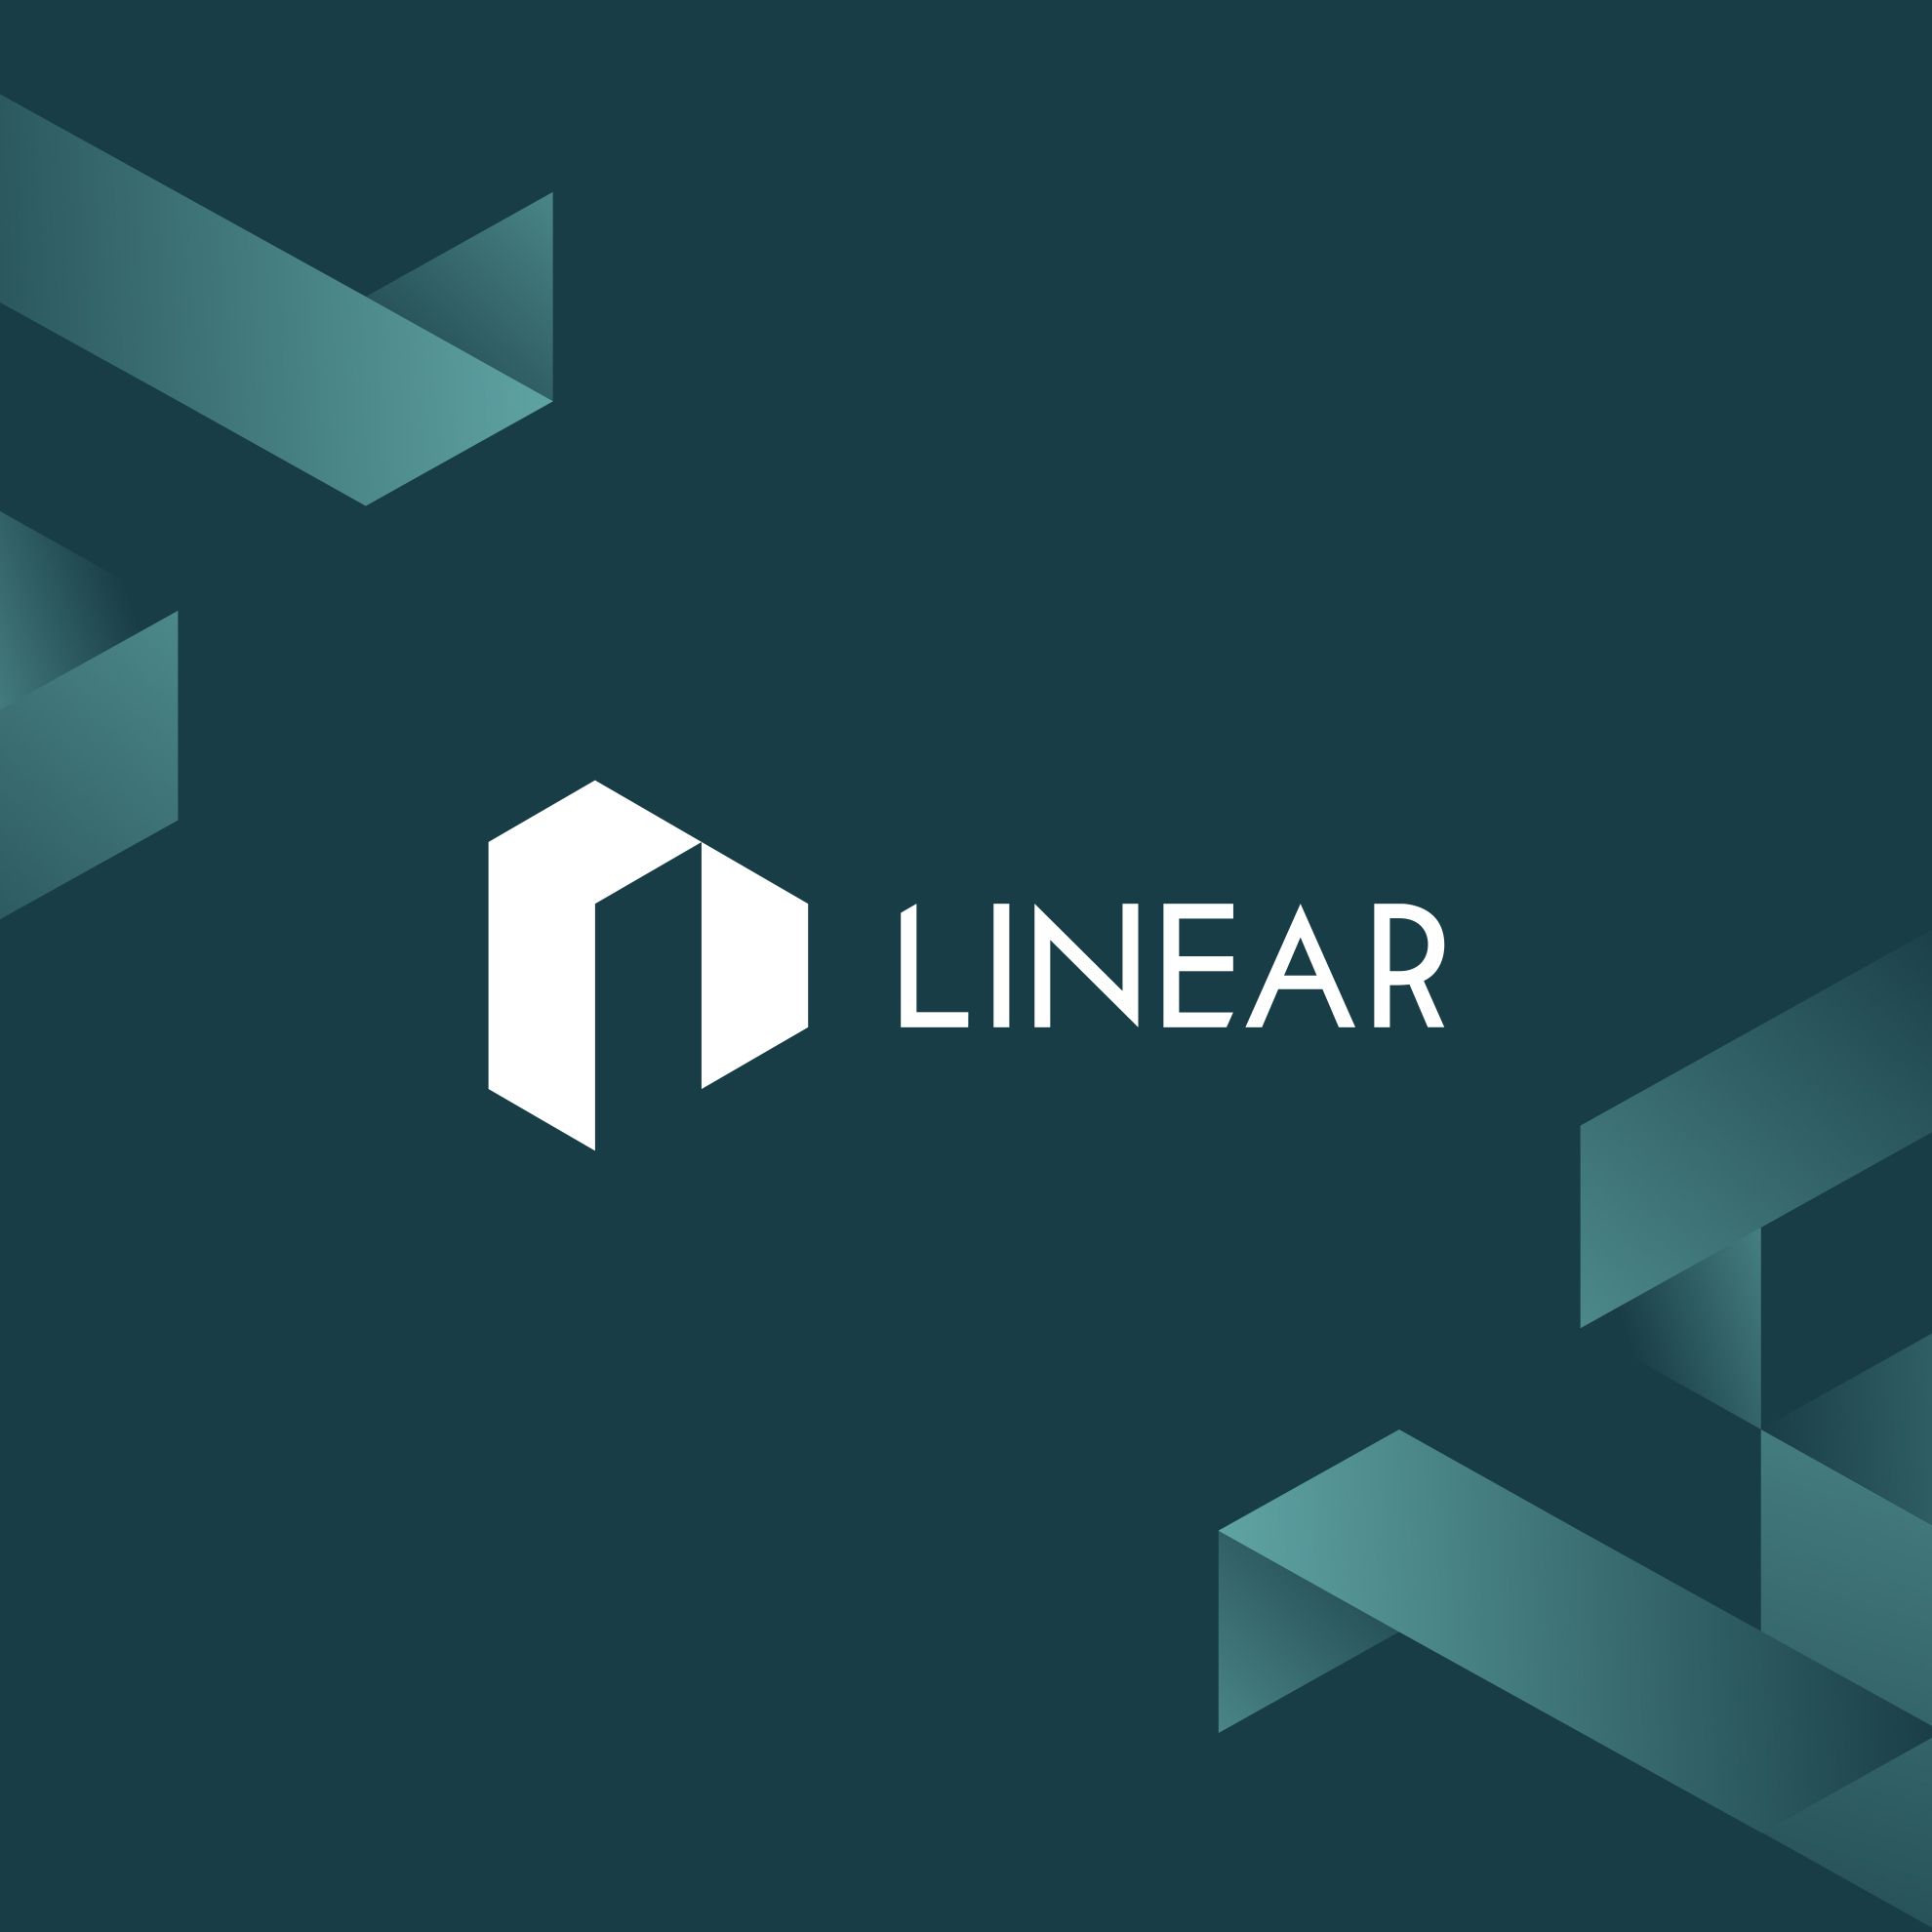 Coverimage with the logo of LINEAR